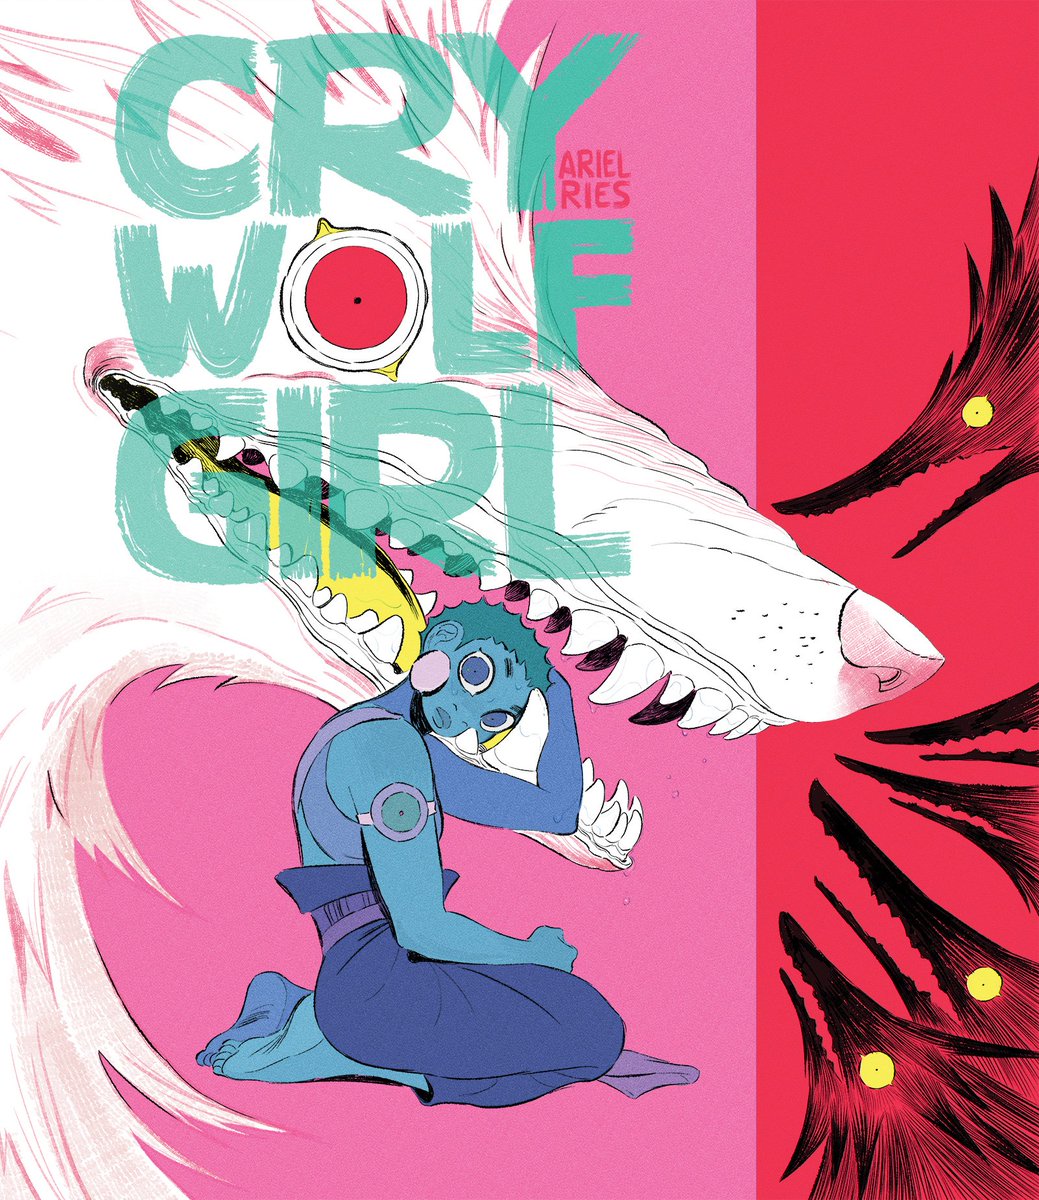 Cry Wolf Girl has been nominated for an Ignatz! Huge thanks to @Short_Box for helping me to make this deeply personal work real. 

You can purchase it here:  https://t.co/DogUb3cyLZ

And if you enjoyed it, consider signing up to vote: https://t.co/EqFet0ba5E 